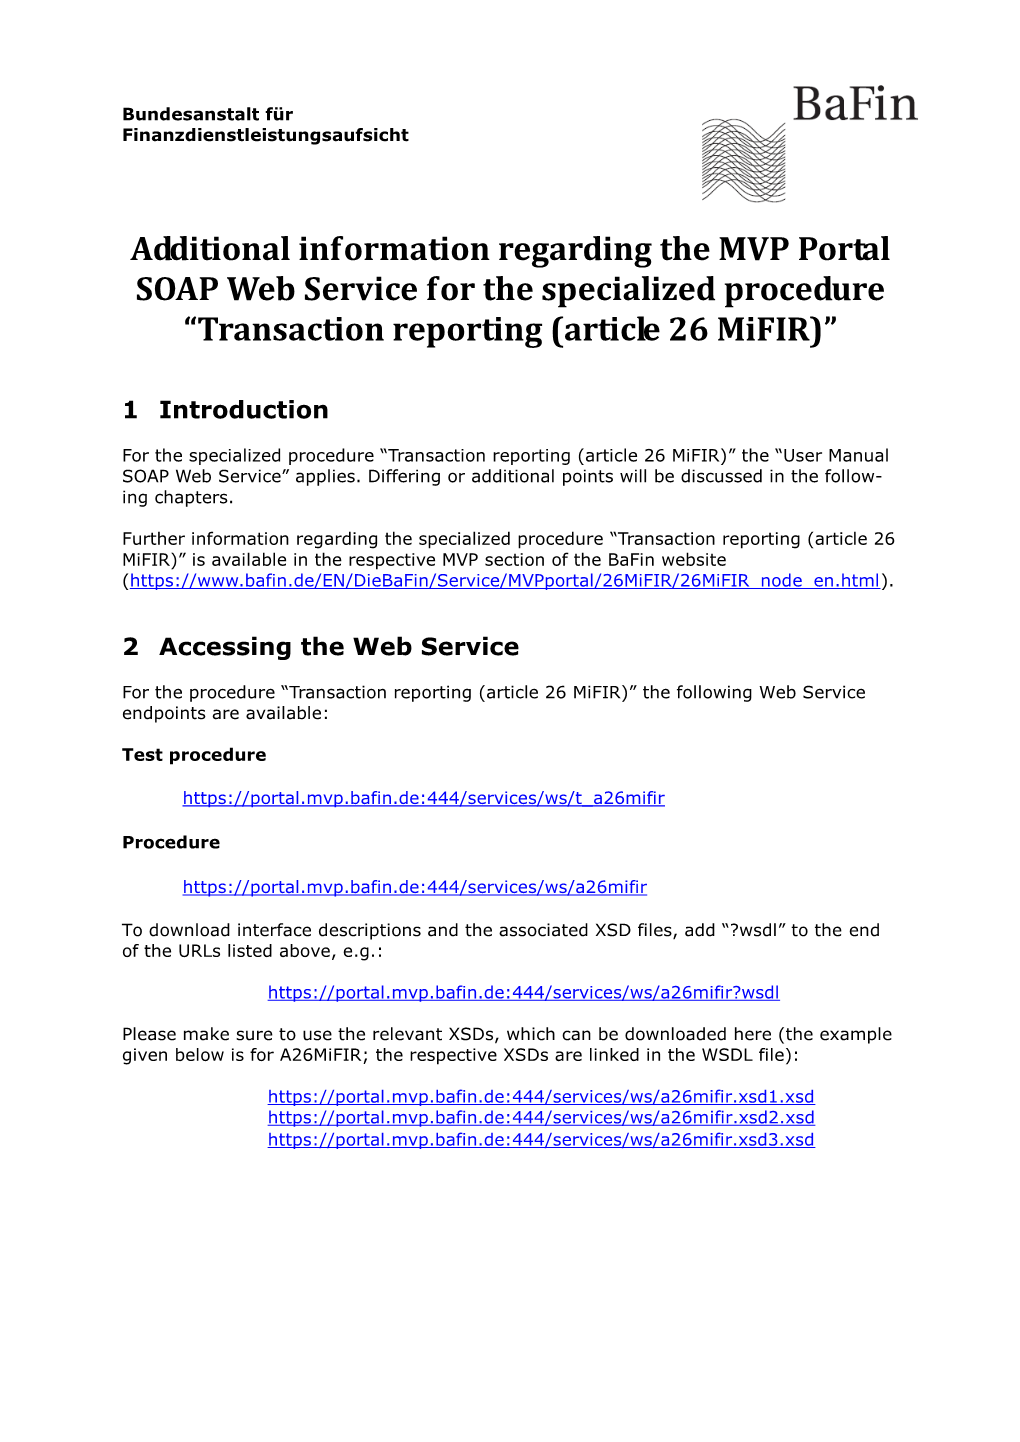 Additional Information Regarding the MVP Portal SOAP Web Service for the Specialized Procedure “Transaction Reporting (Article 26 Mifir)”